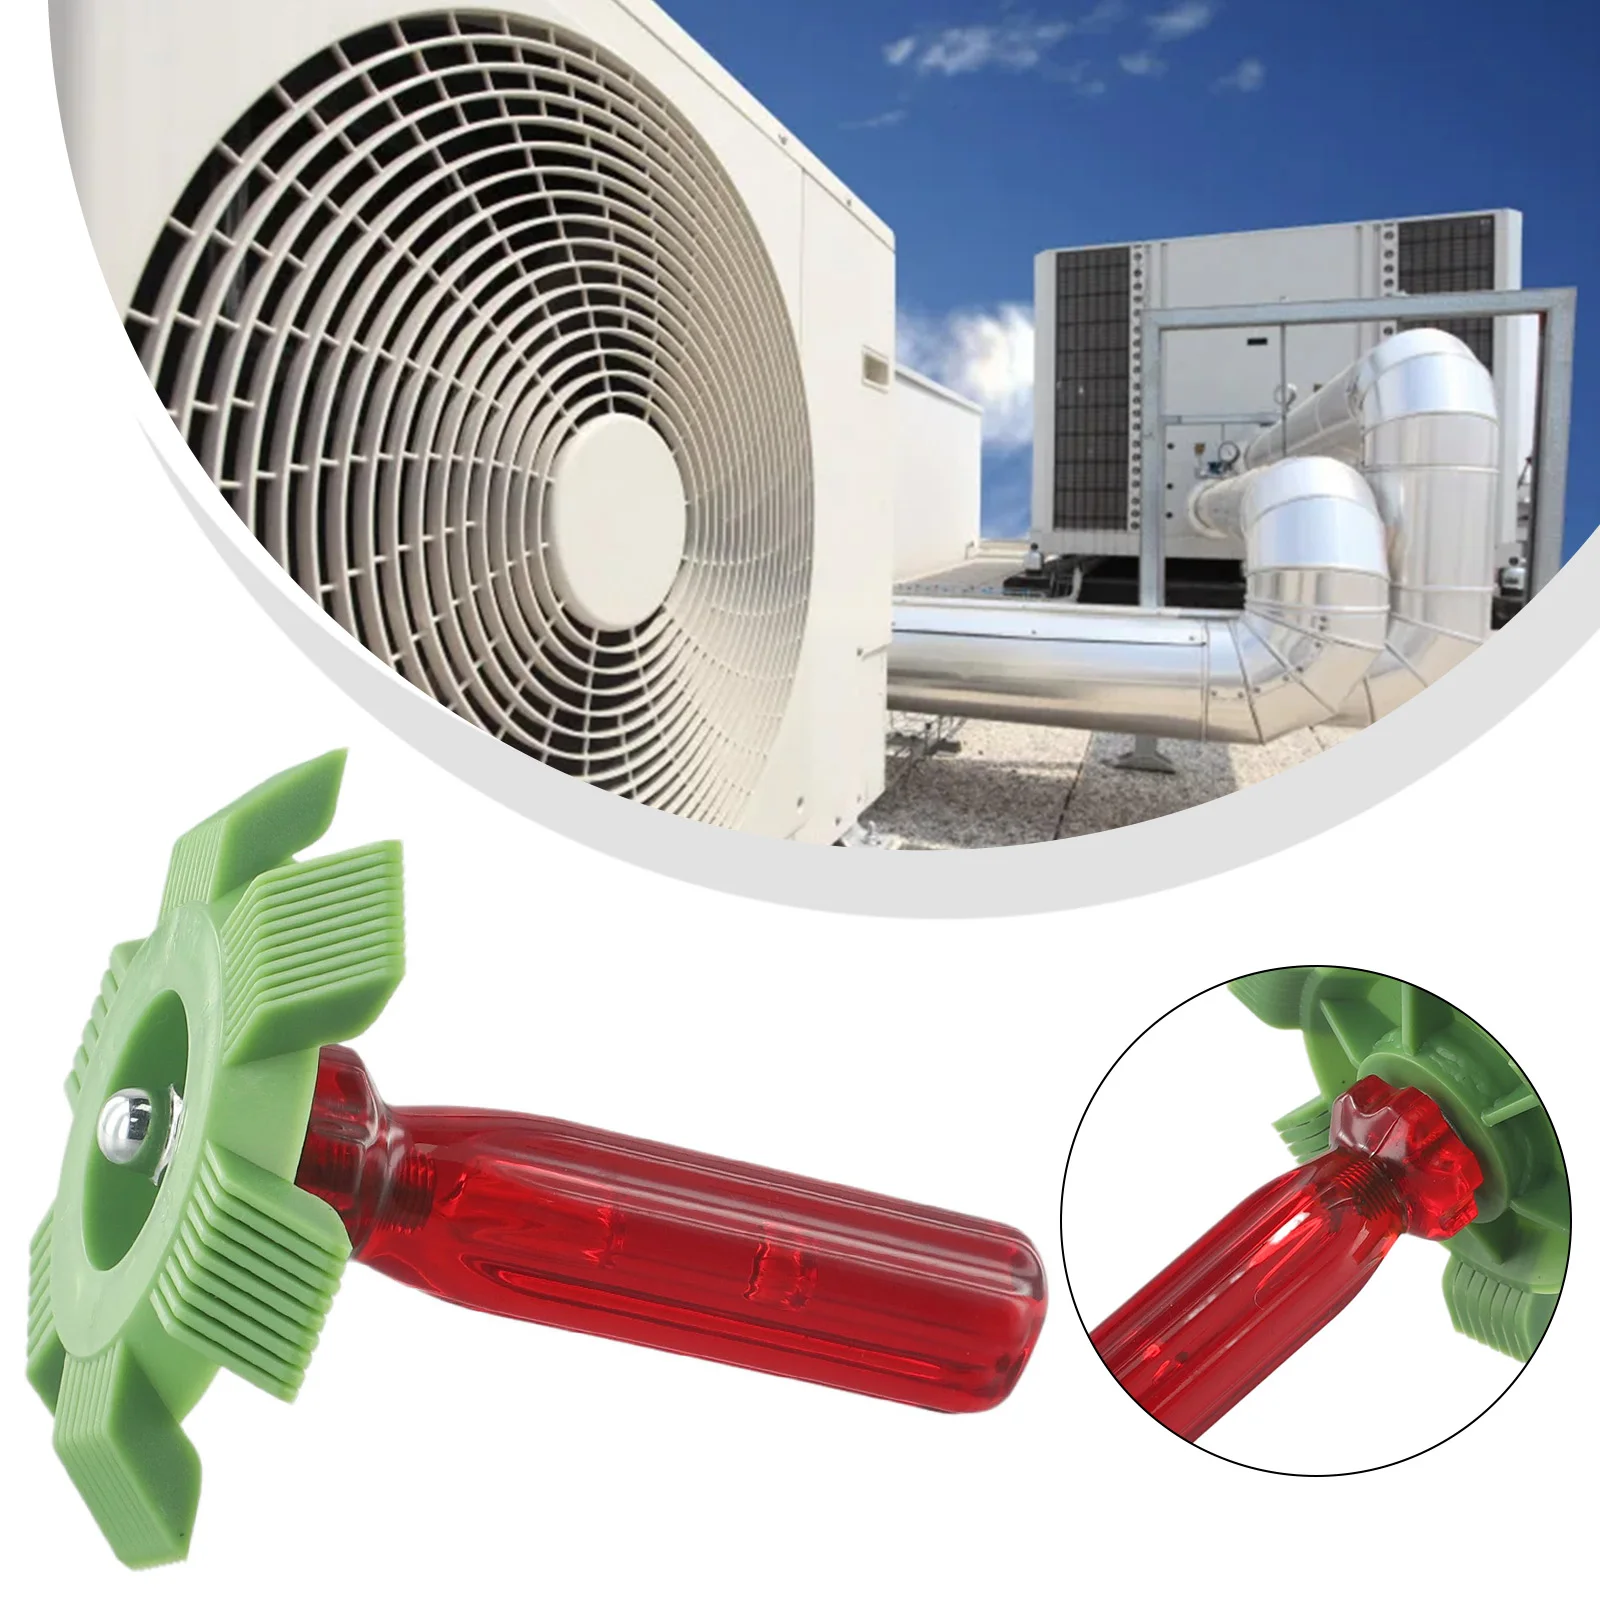 

Air Conditioner Split System Fan Blades Fin Repair Comb Cooler Plastic Condenser Compact Refrigeration Tool Clean Straighten Hot